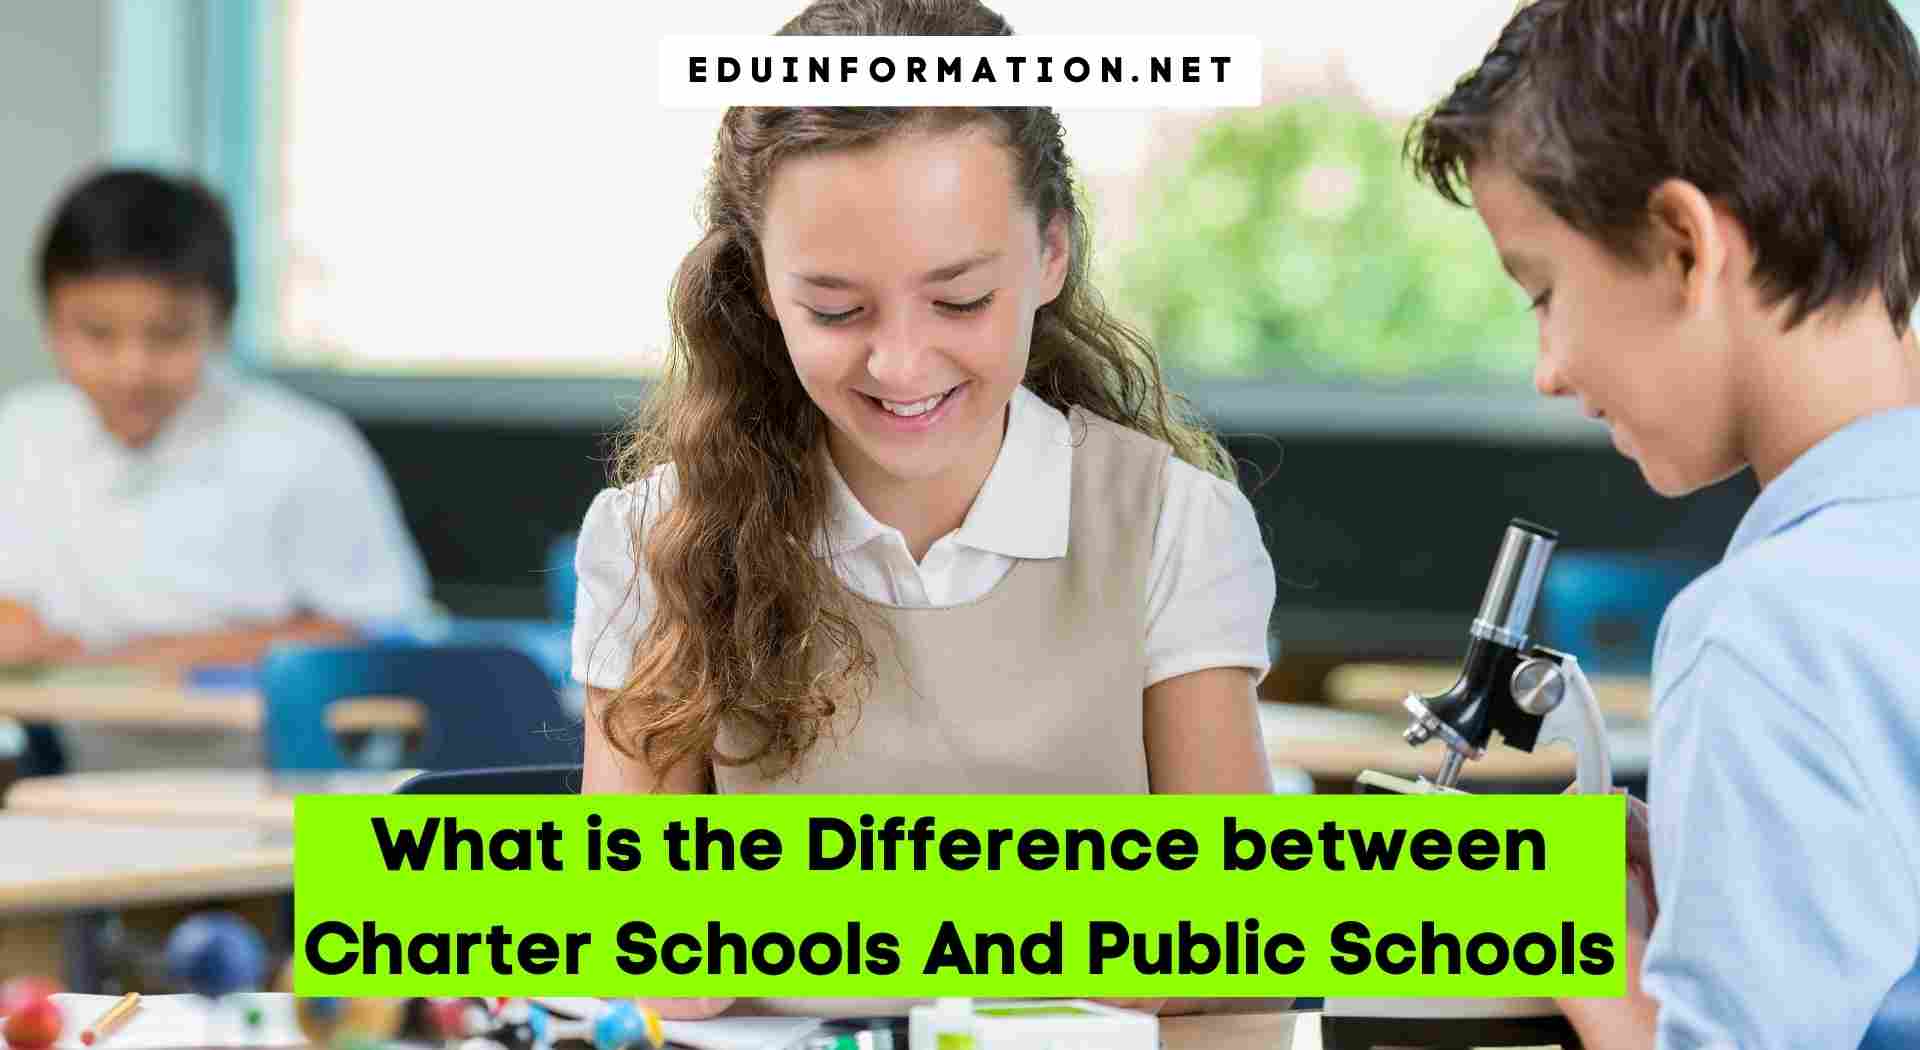 What is the Difference between Charter Schools And Public Schools